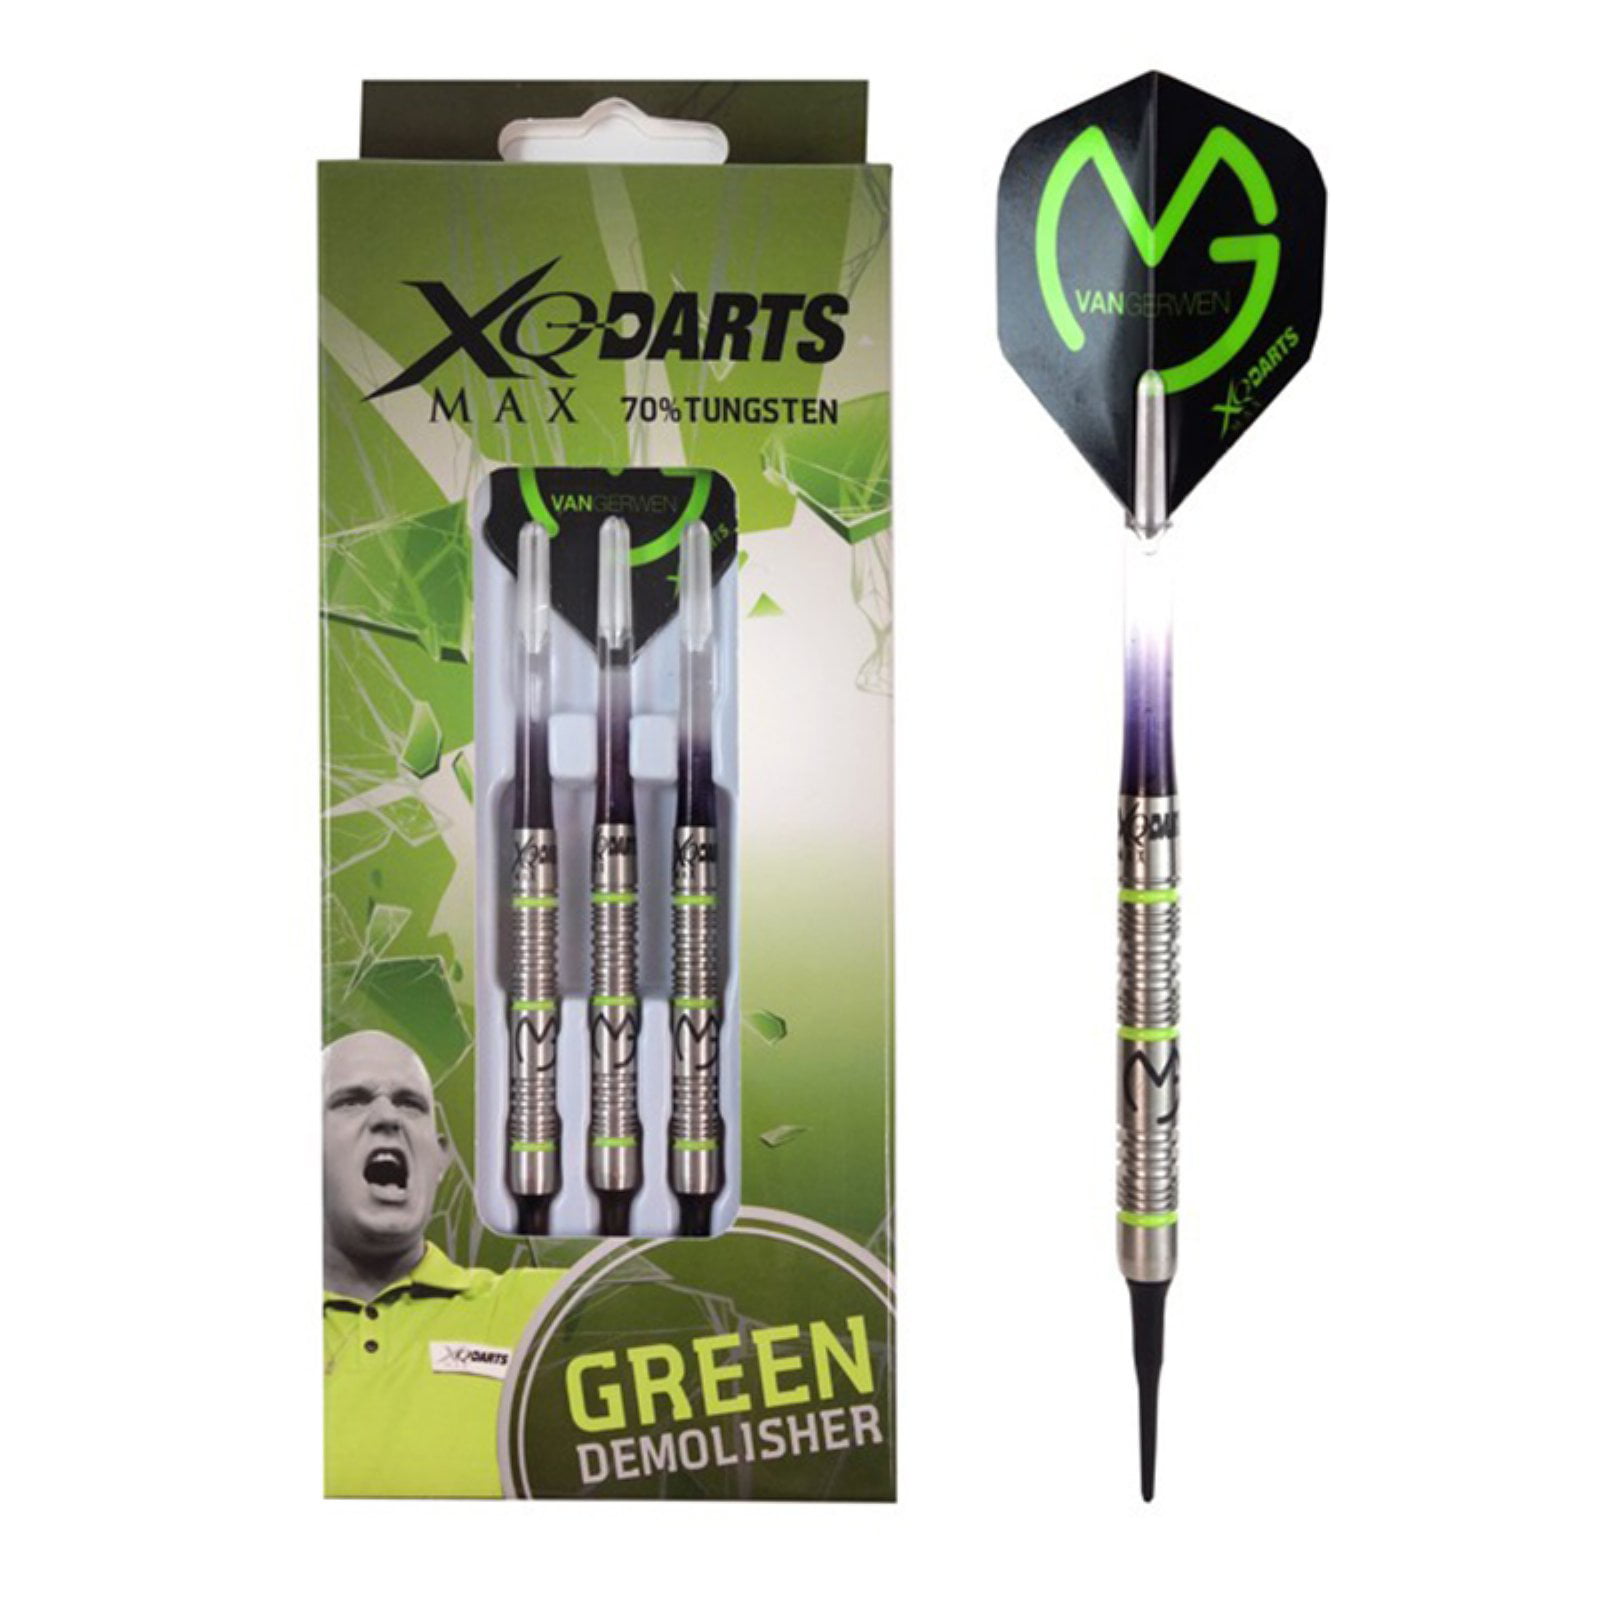 New Mighty Michael van Gerwen edition full Dartboard set Mvg Free Delivery 